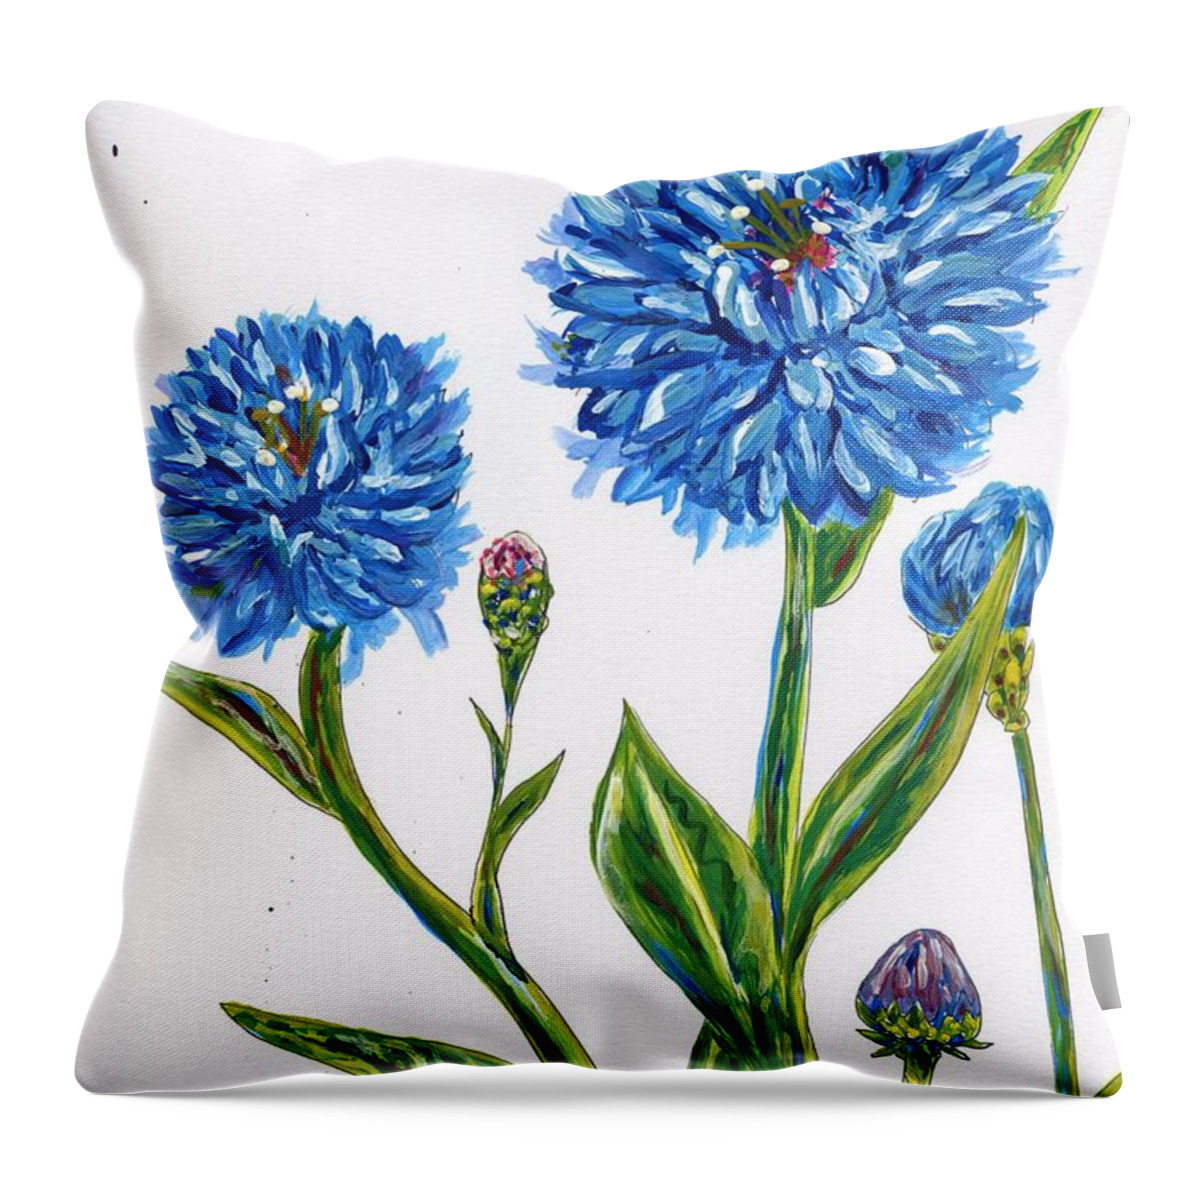 Corn Flowers Throw Pillow featuring the painting Corn Flowers Illustration by Catherine Gruetzke-Blais